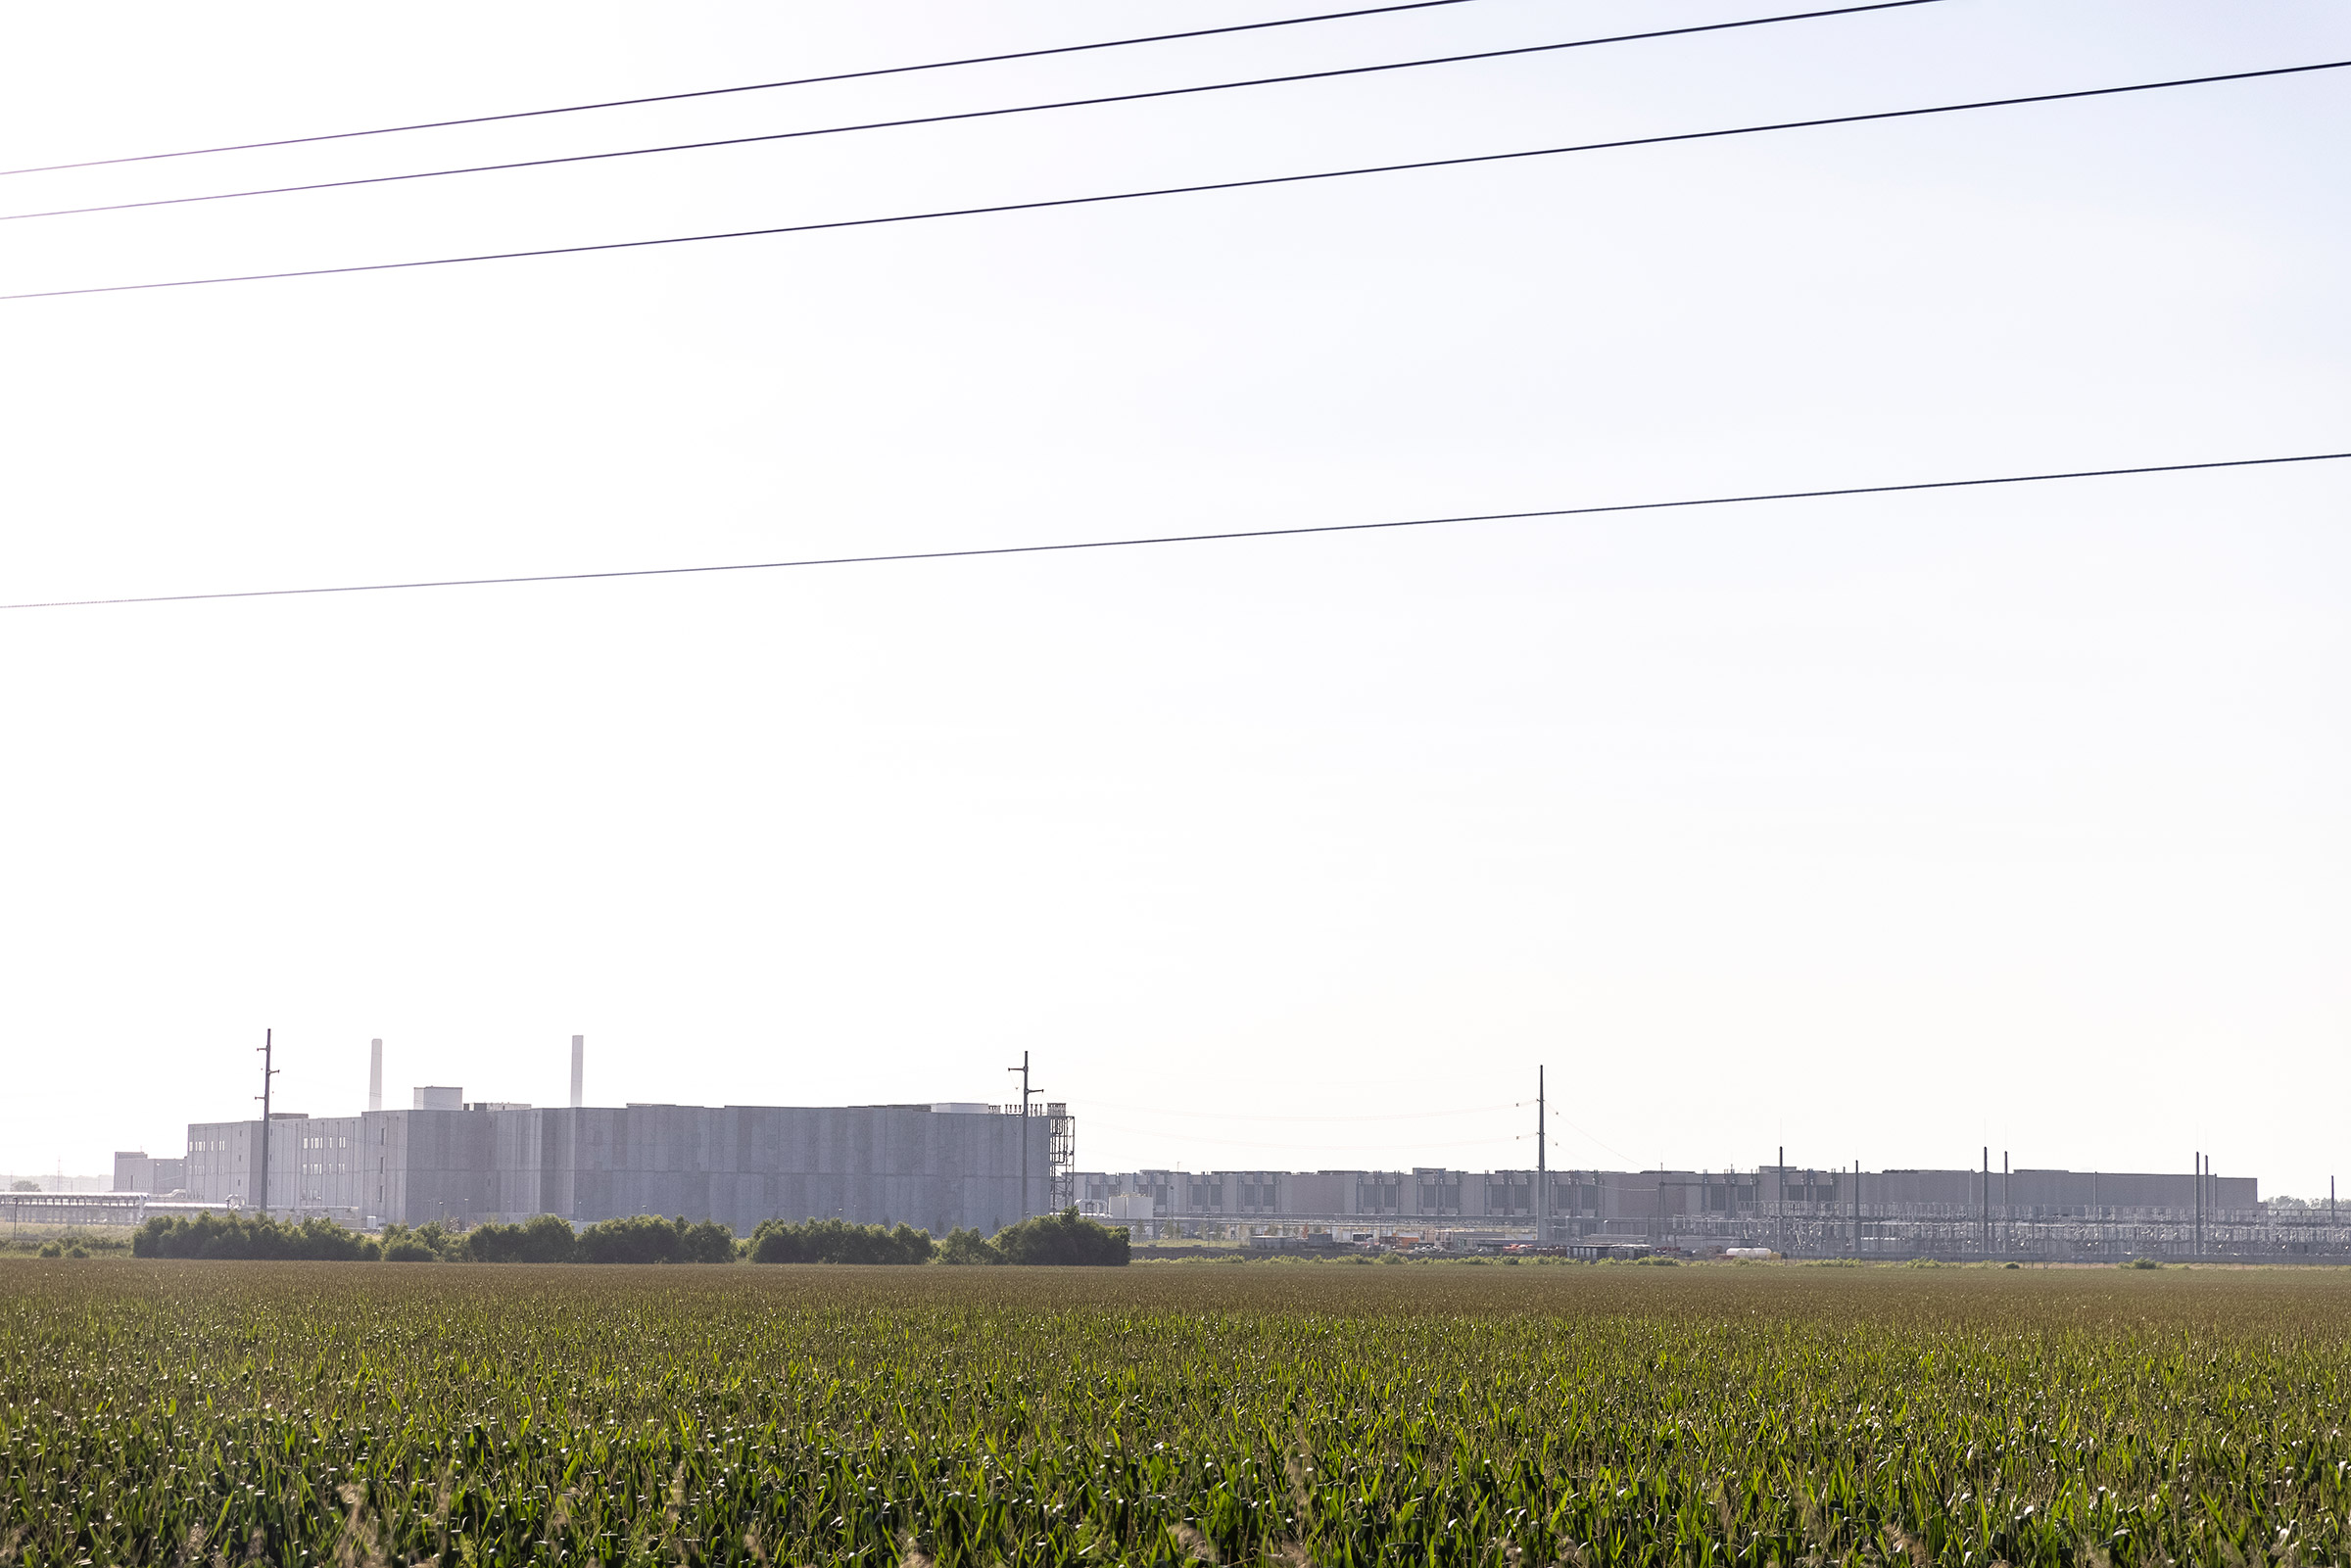 A Google data center in Council Bluffs, Iowa on July 29, 2021. (Kathryn Gamble for TIME)